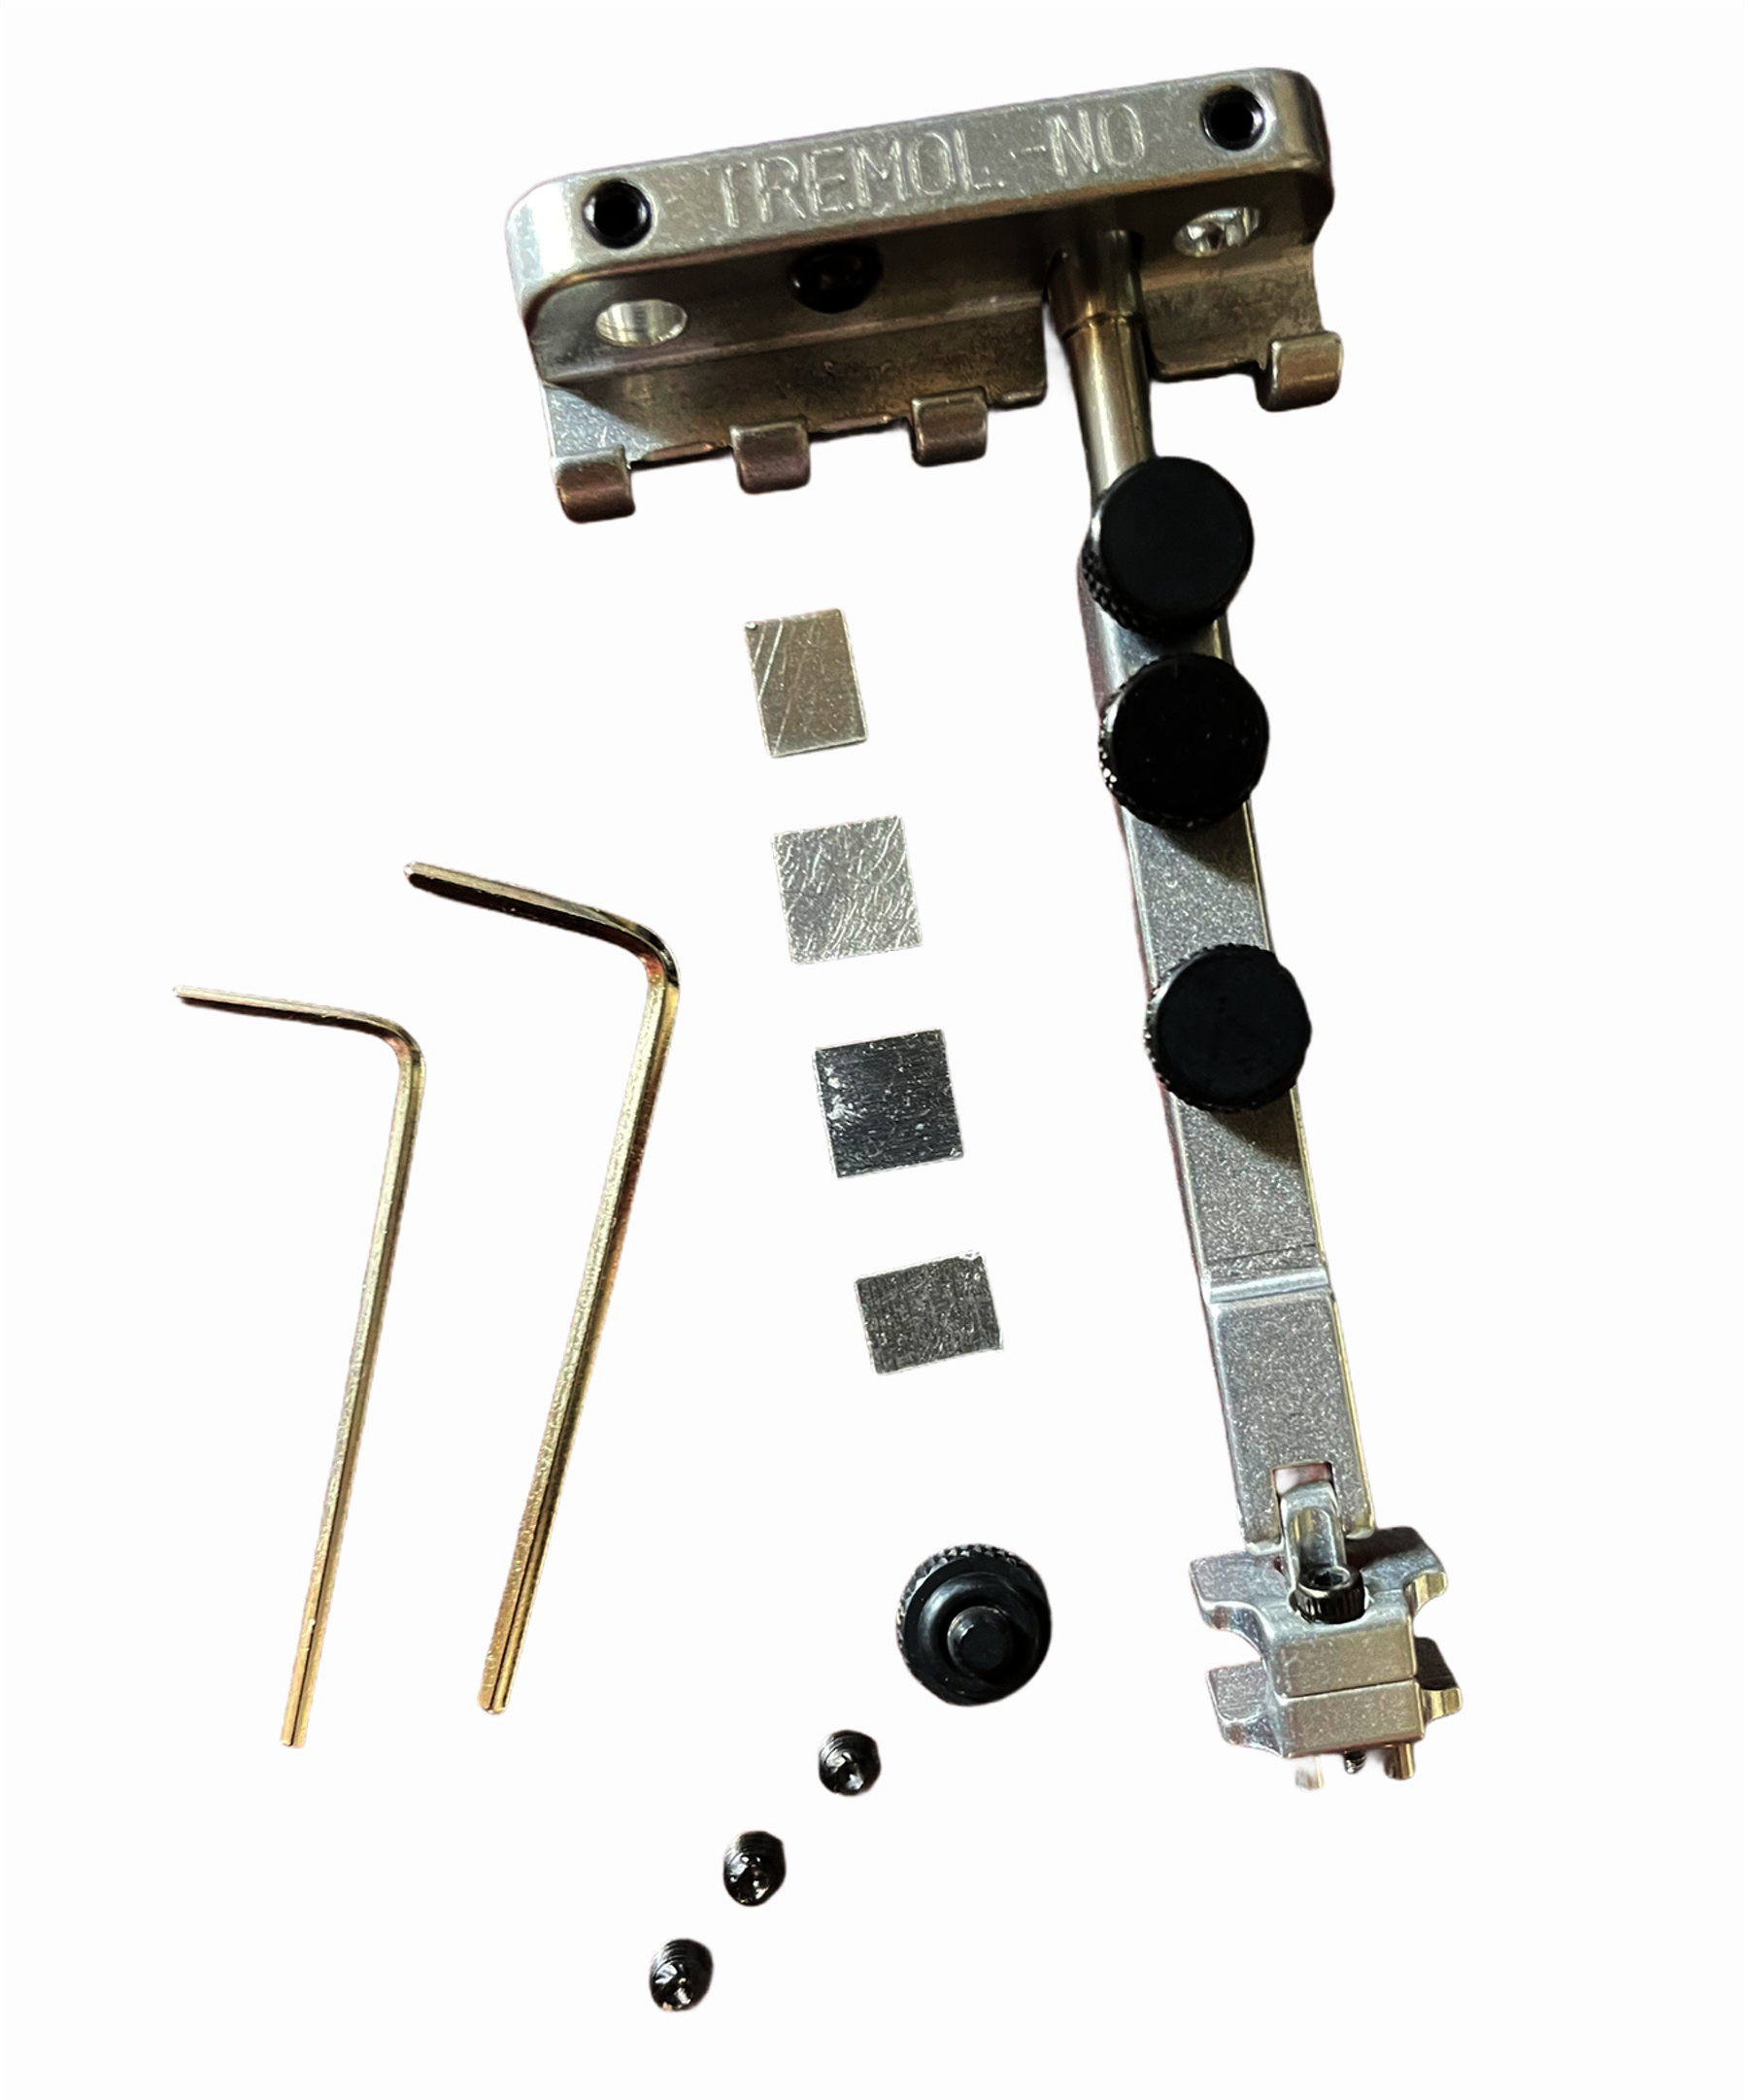 tremolo locking device with two allen wrenches and hardware